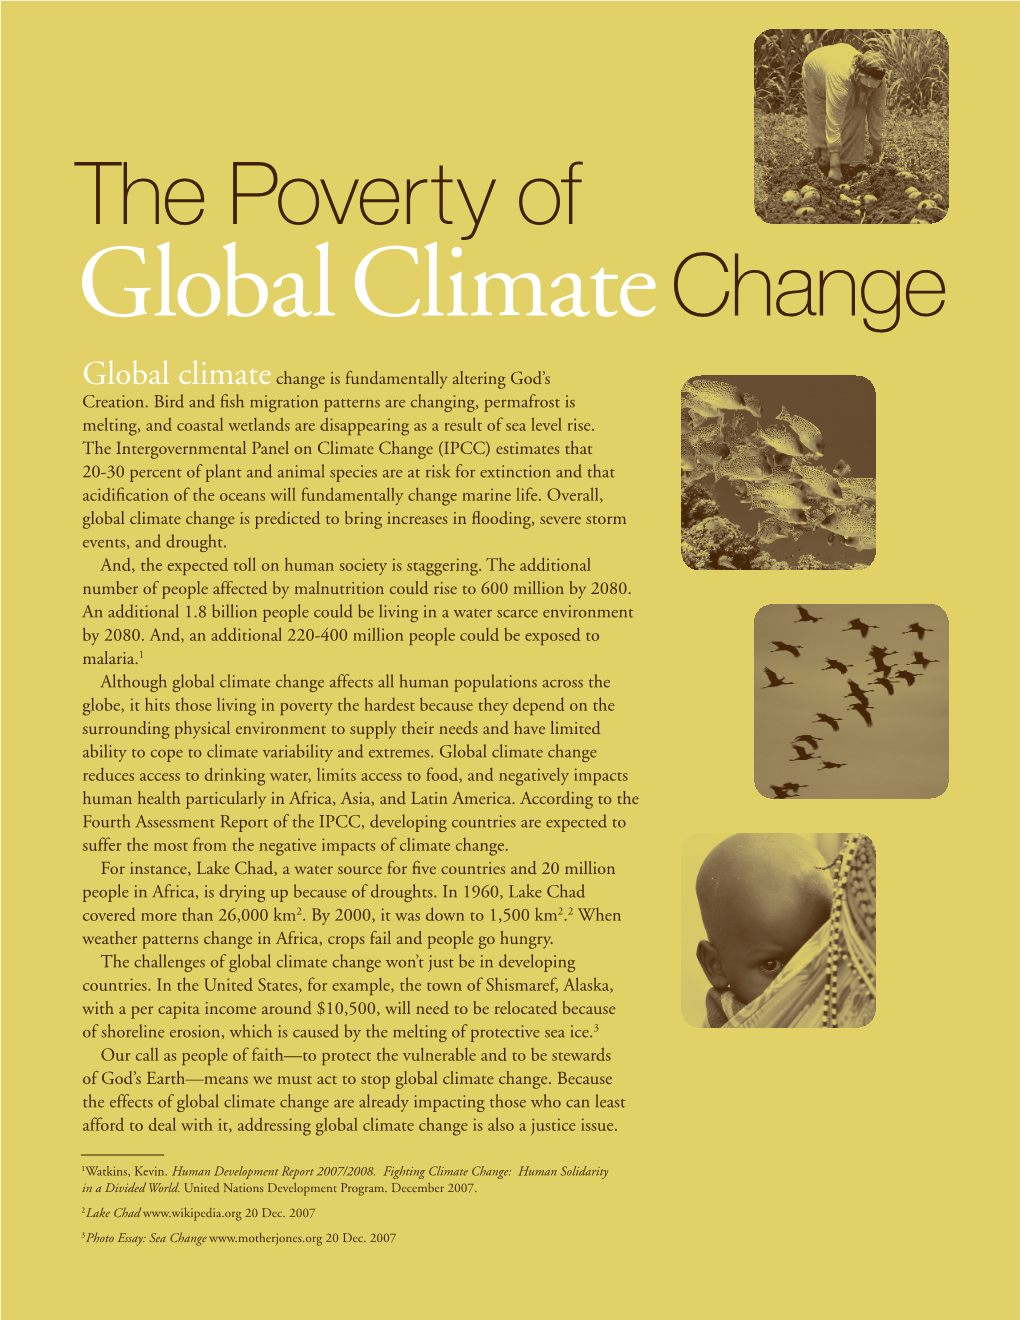 The Poverty of Global Climate Change